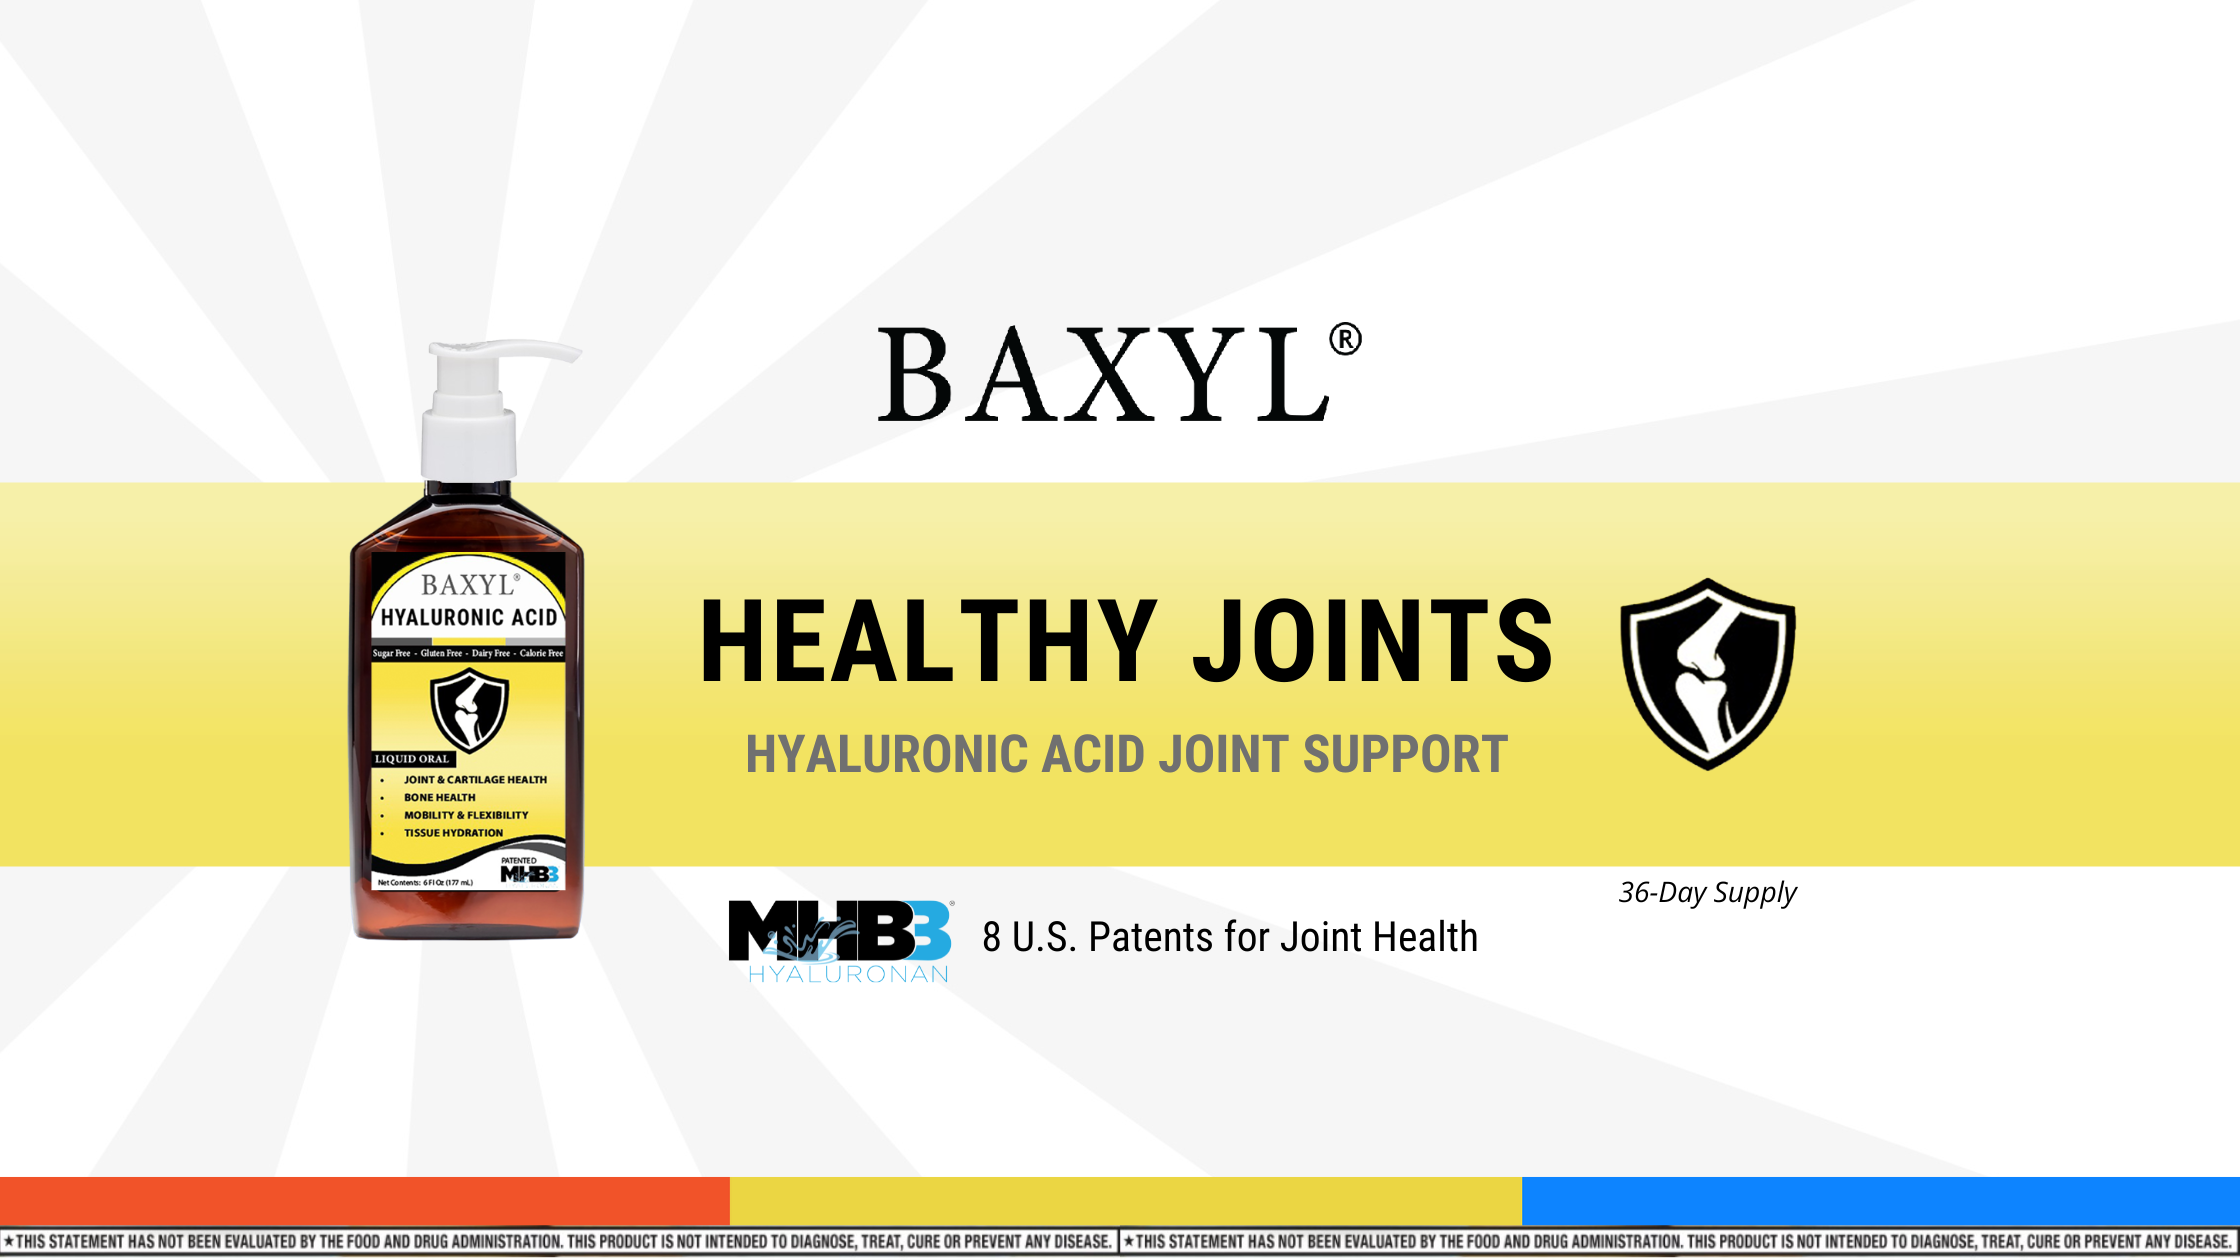 Baxyl hyaluronic acid joint relief supplement with yellow logo and bone shield